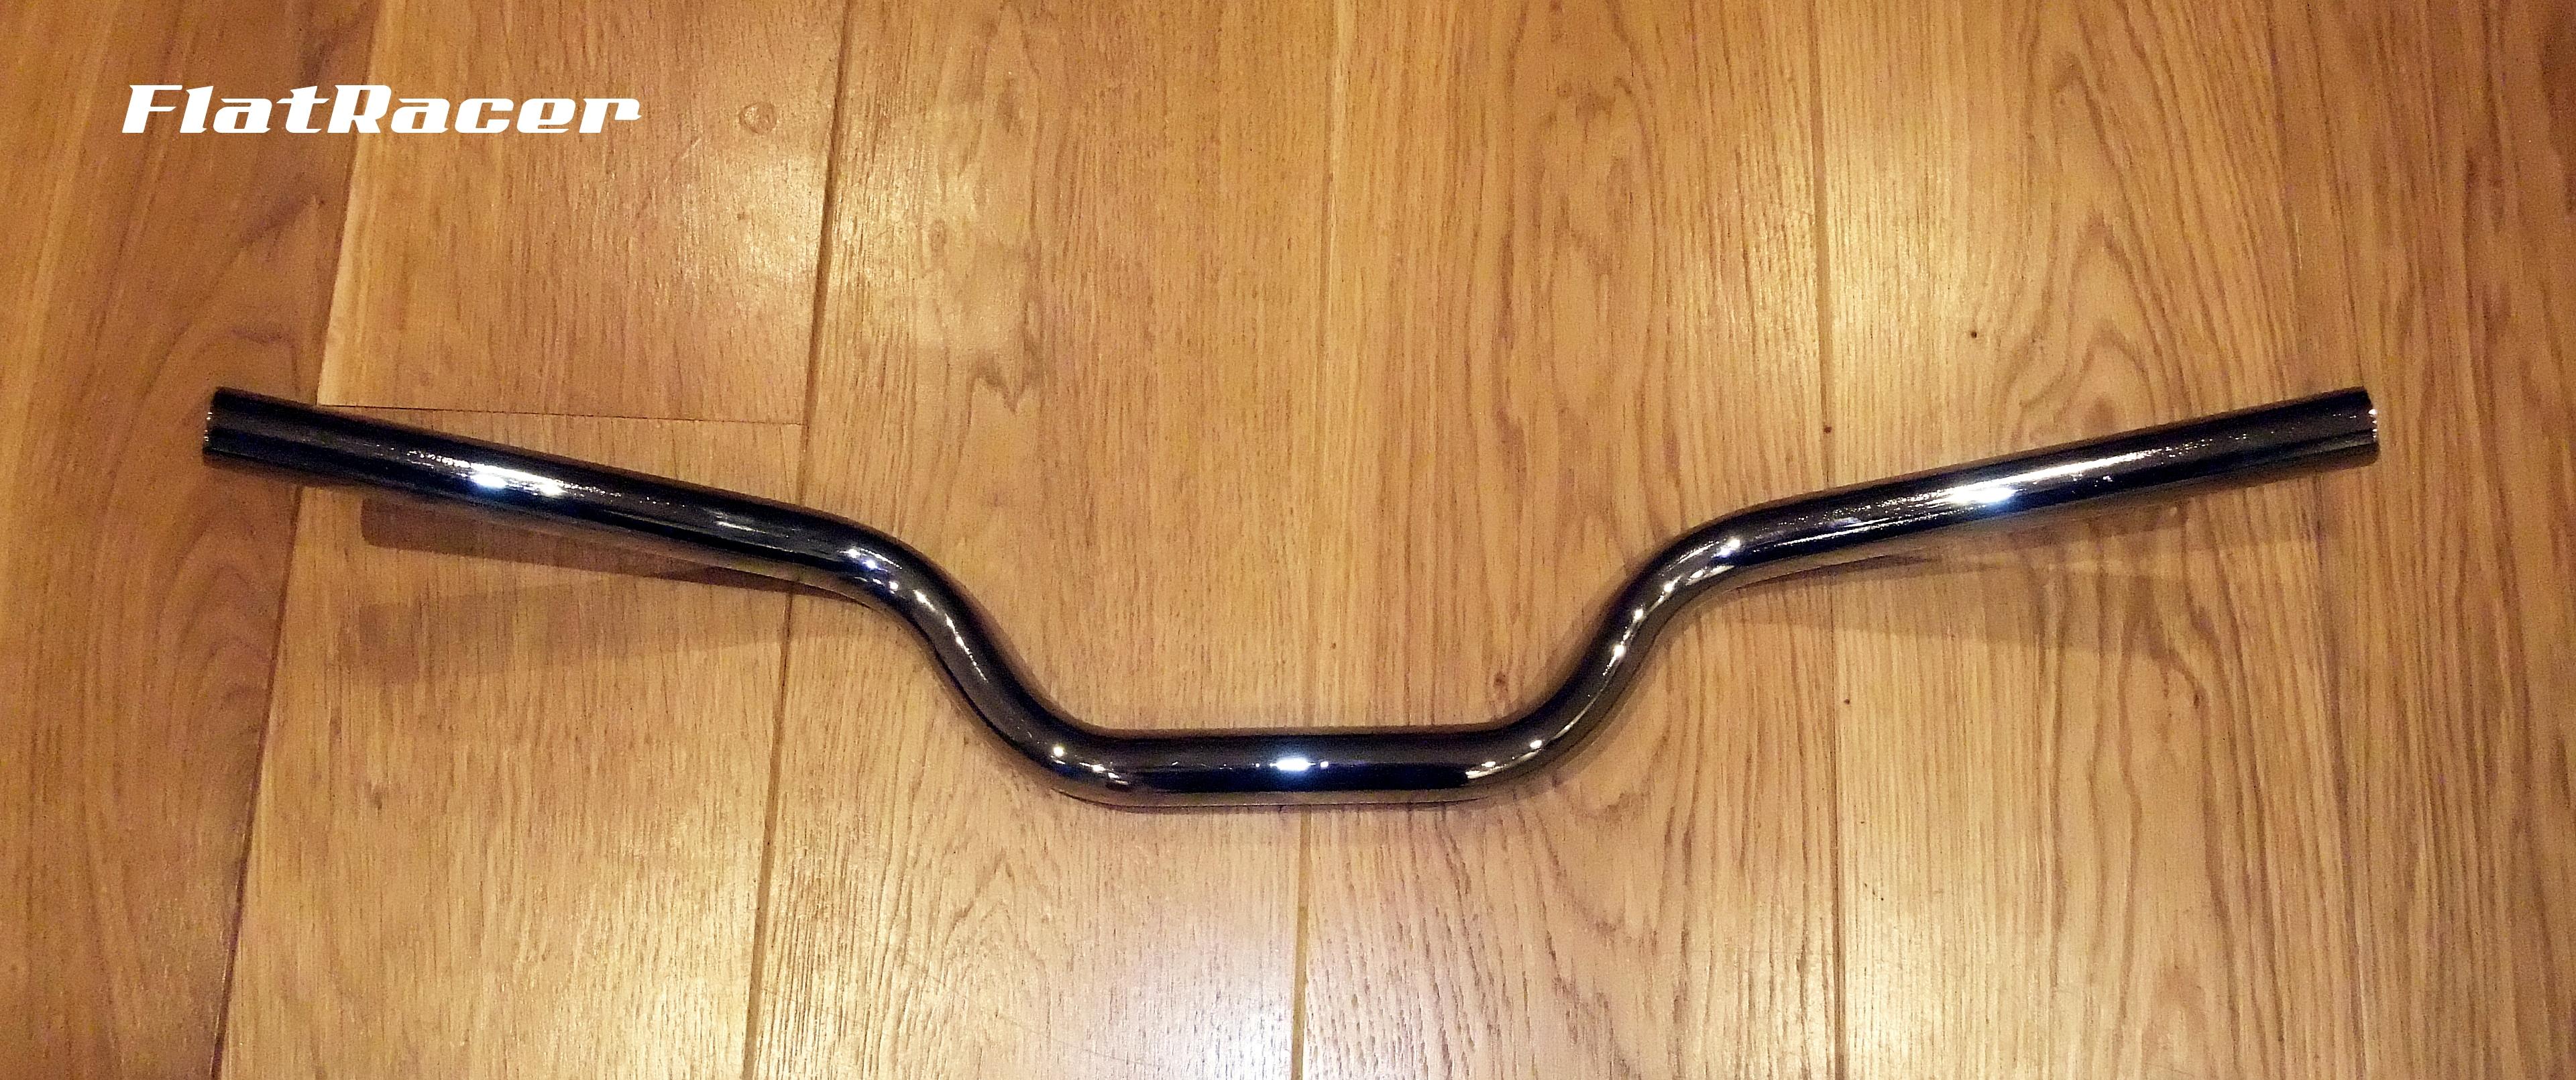 FlatRacer BMW R90S replica handlebar - 32711233126 (superseded now by 32712303042)